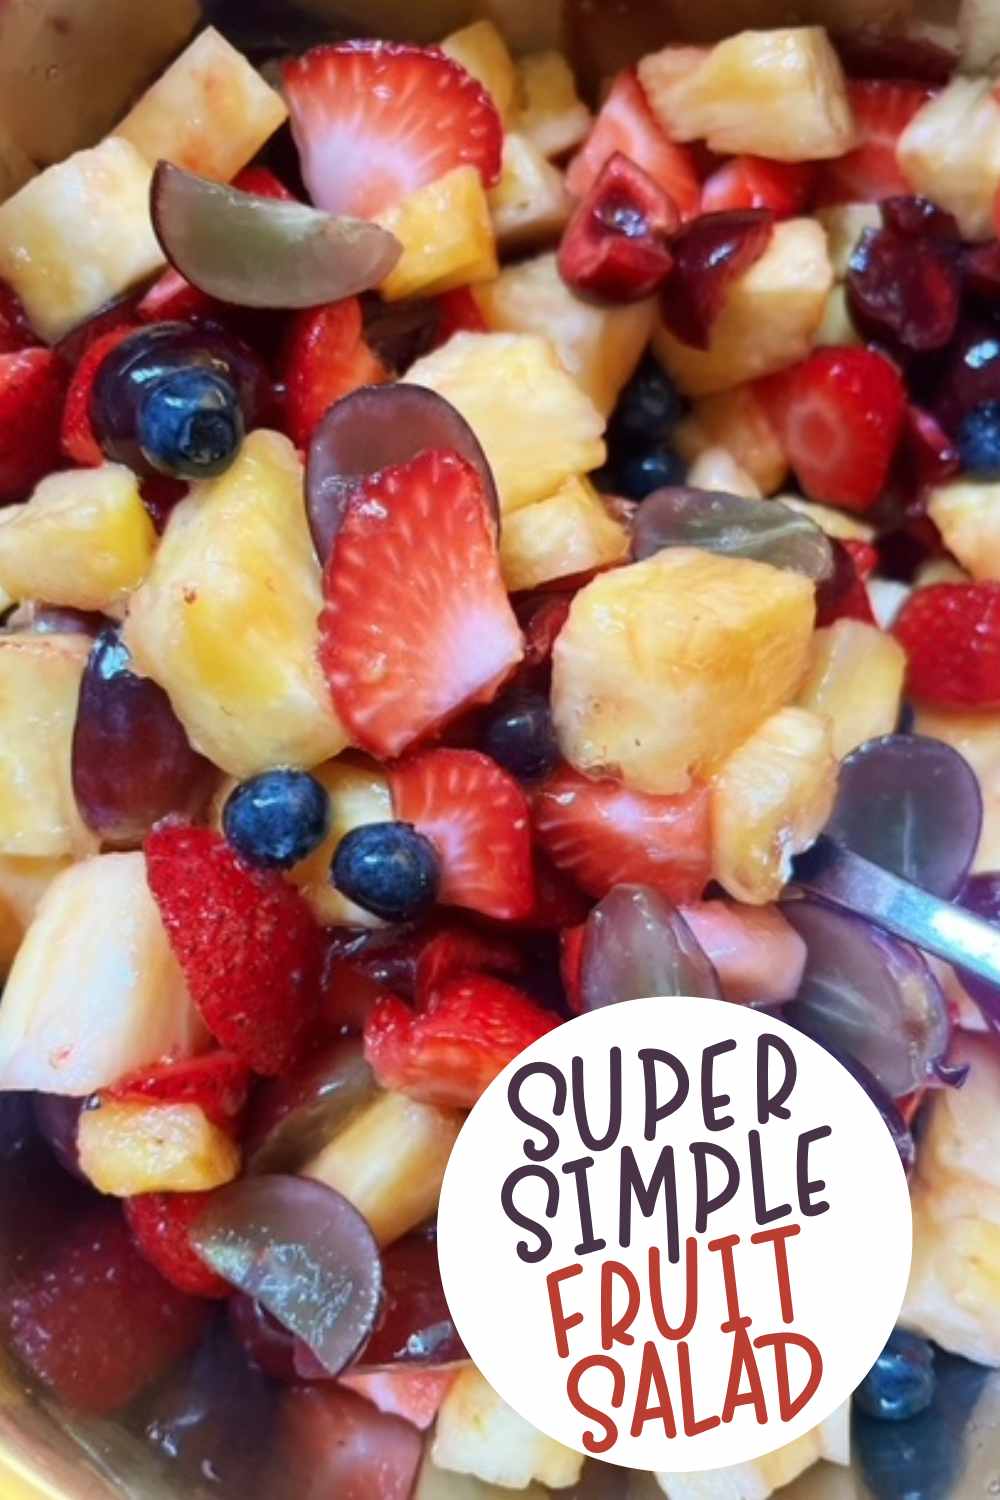 This super simple fruit salad recipe is delicious and refreshing! Mix together your favorite fruits with a touch of maple syrup and you're done.